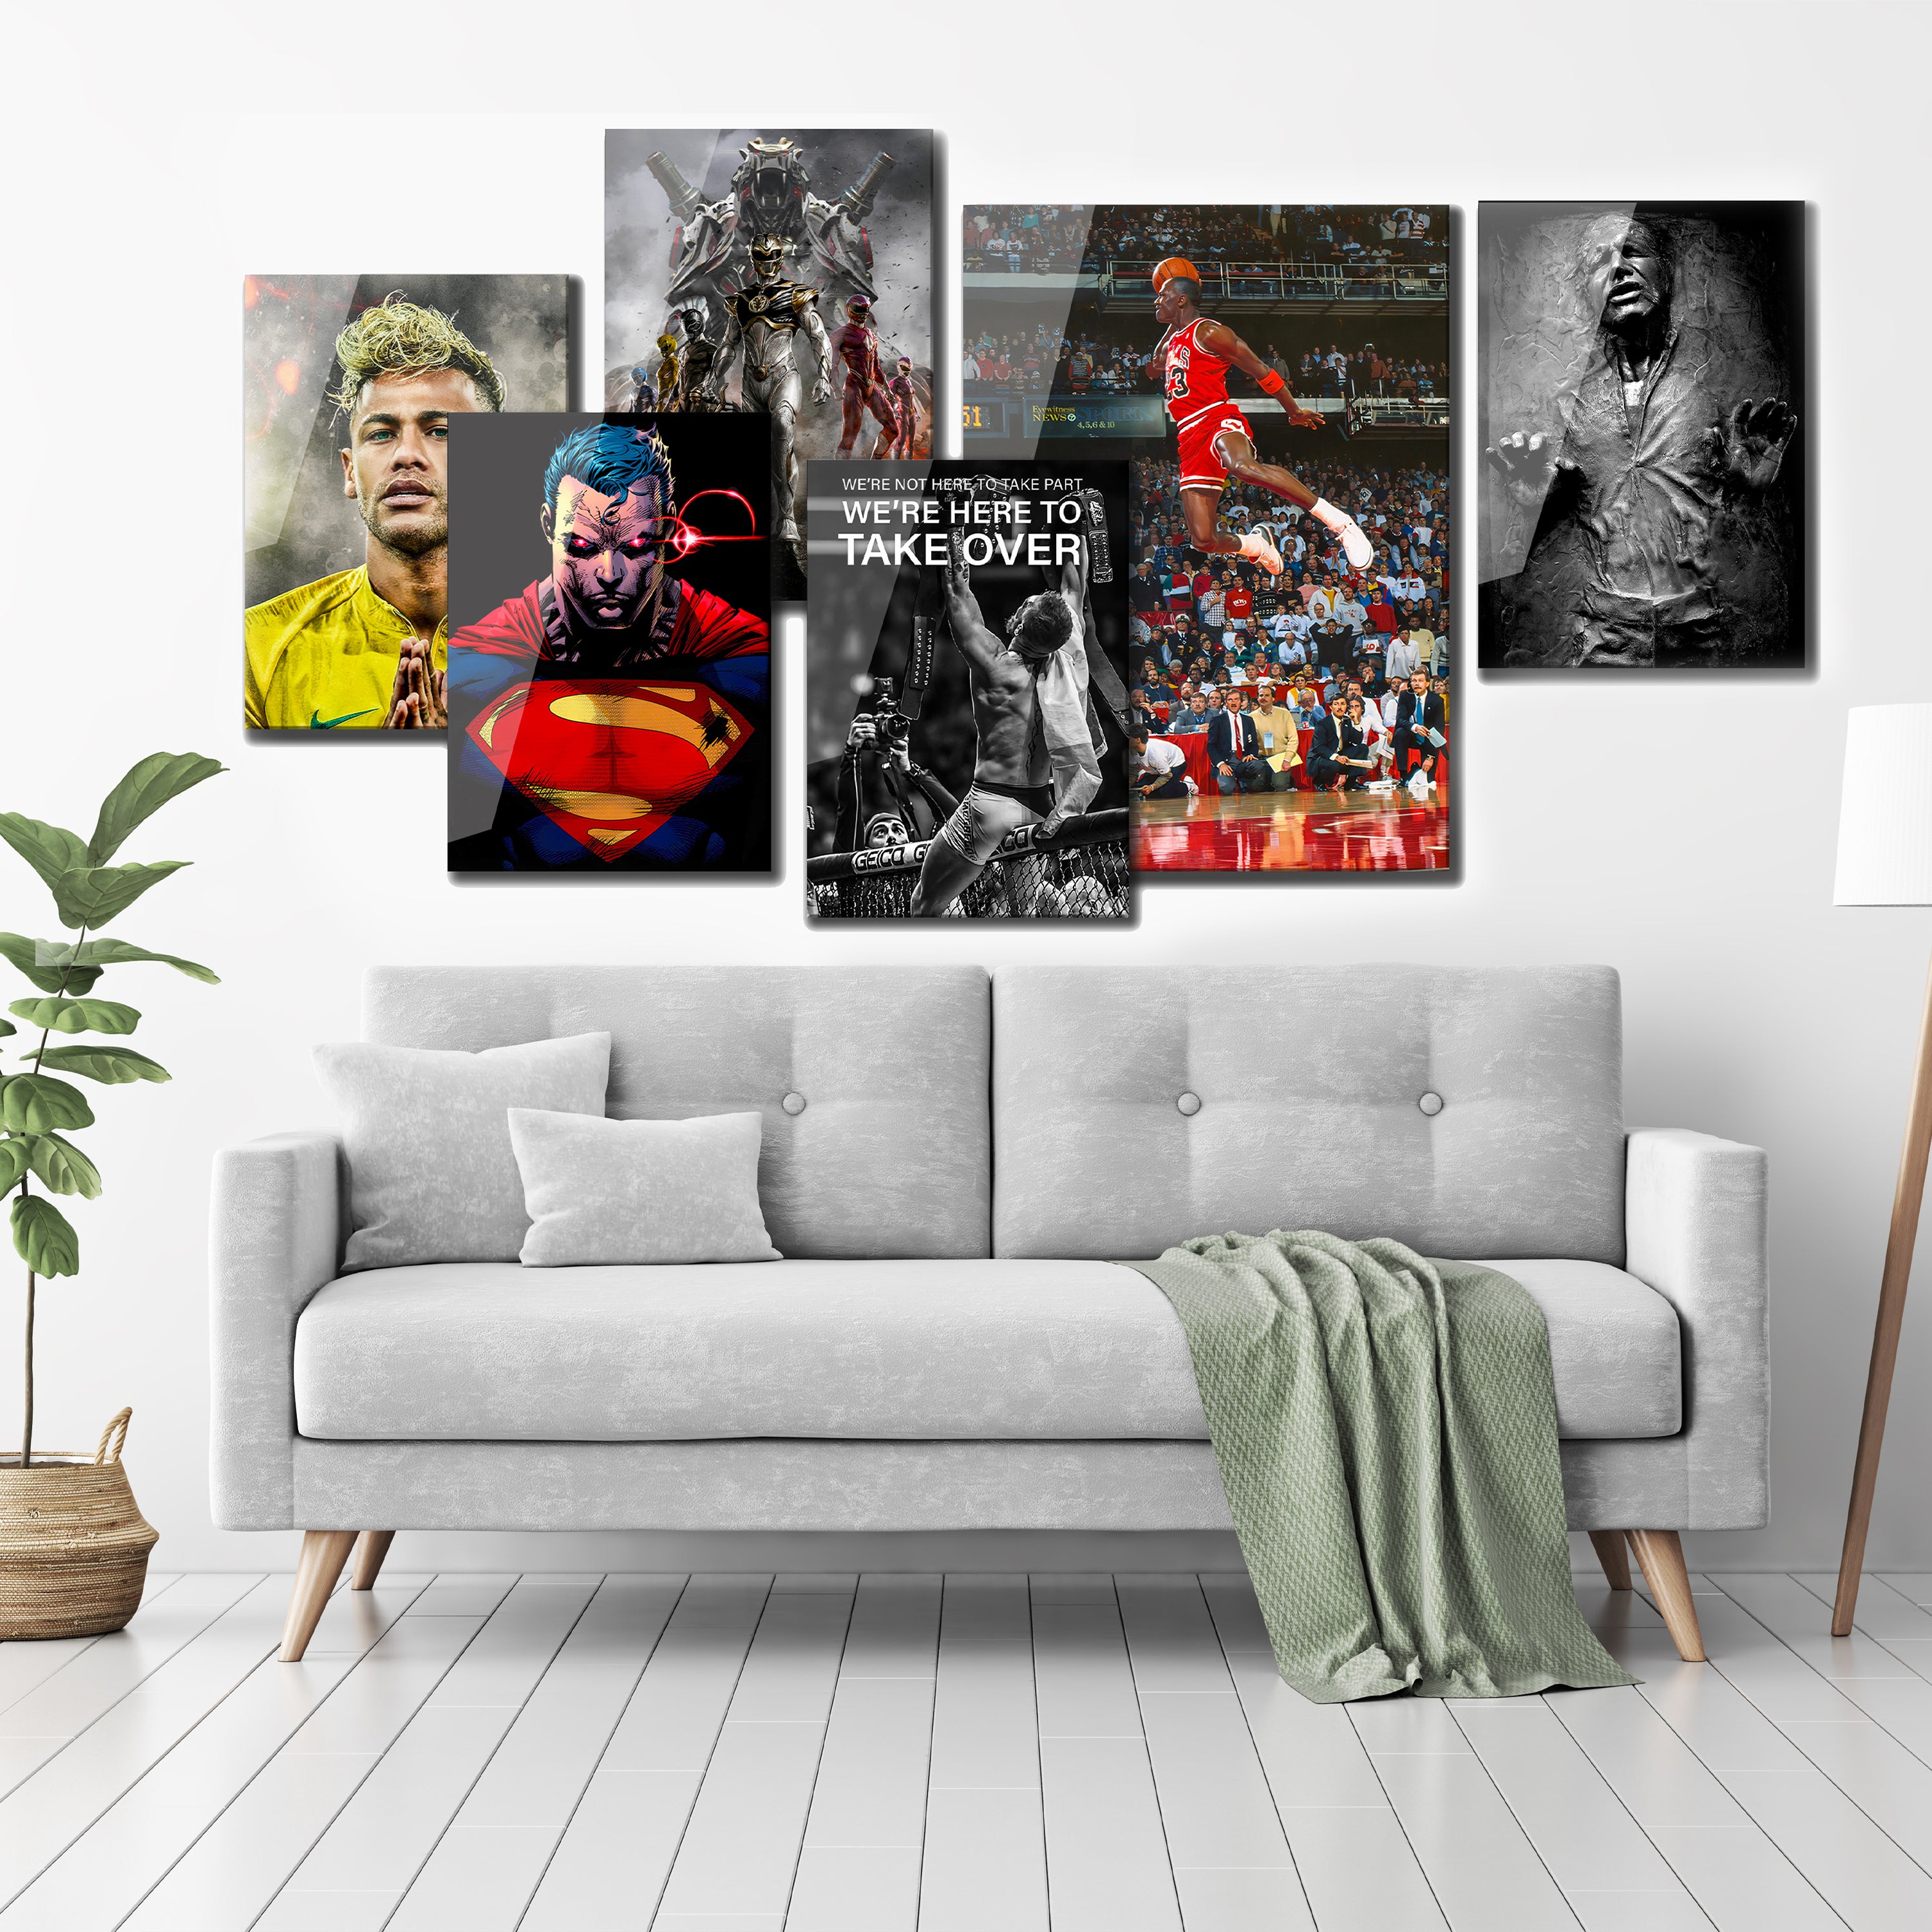 Custom Metal Print - Upload any image or file and we will make it on metal for you